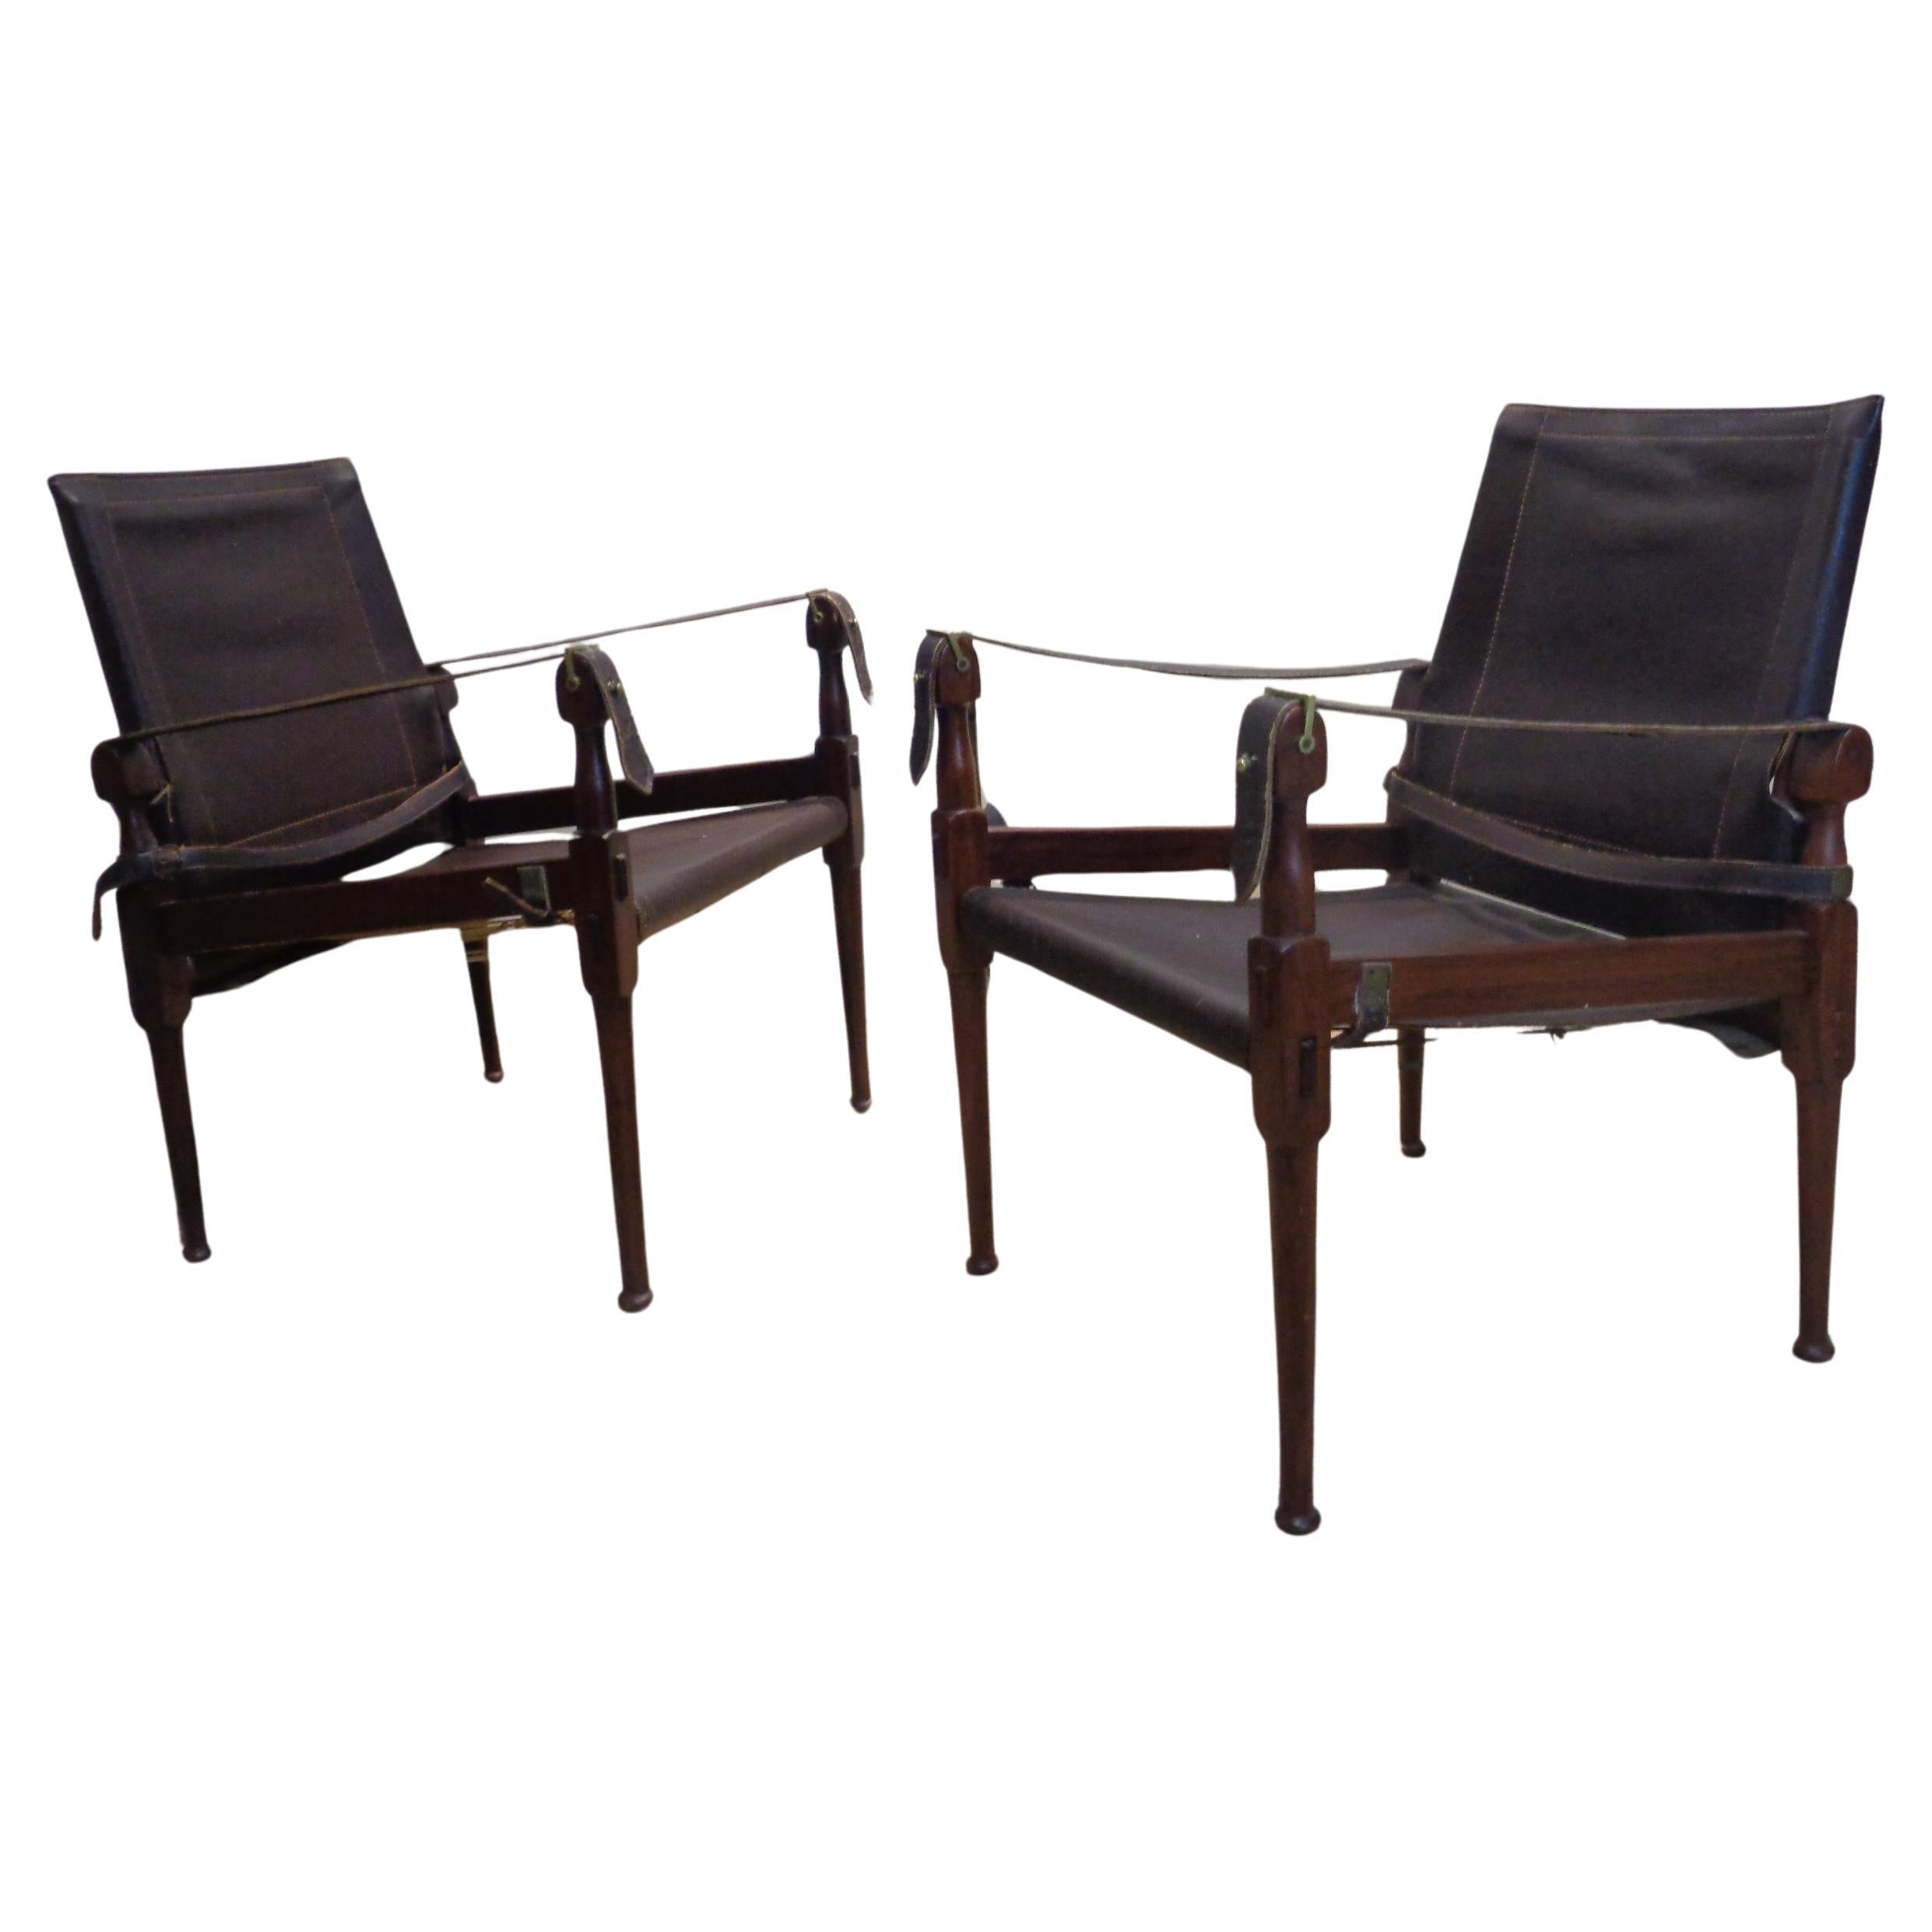  Campaign Style Safari Chairs, M. Hayat & Bros. 1960-1970 For Sale 4